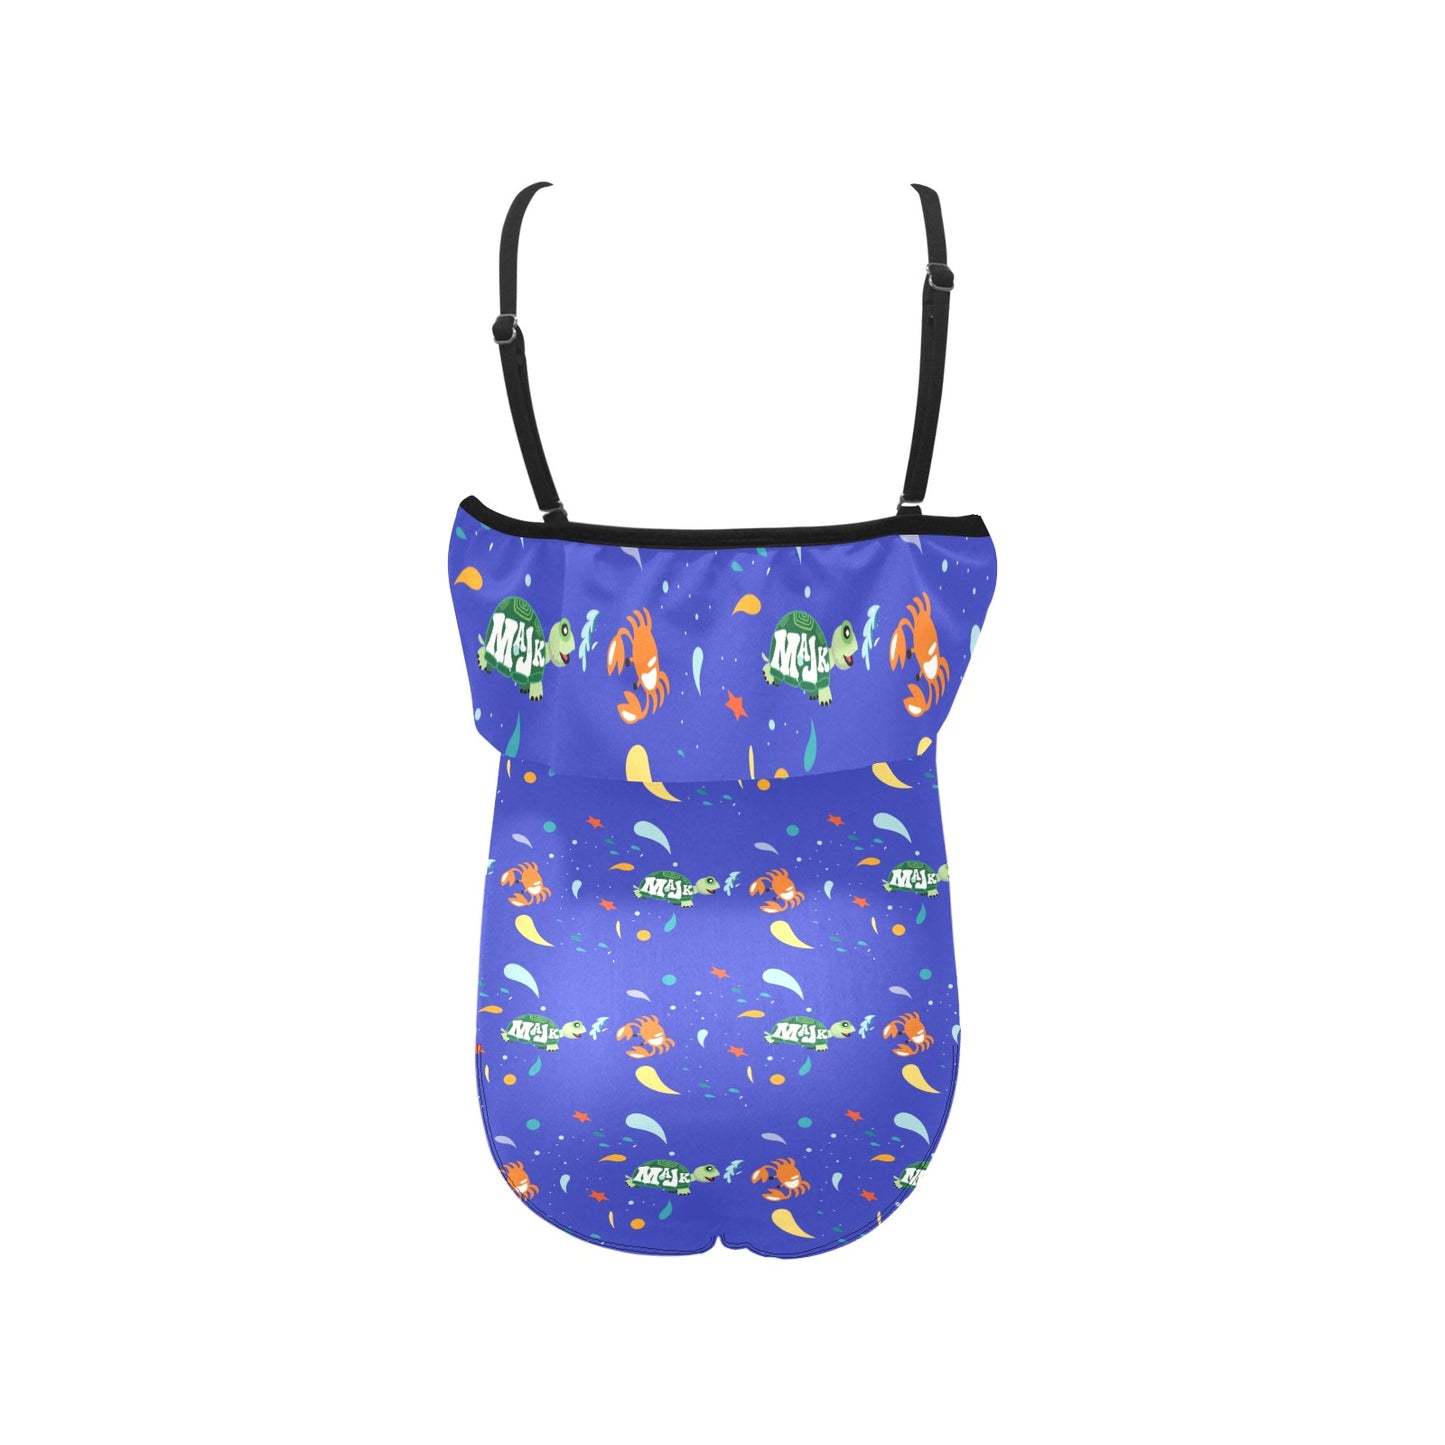 Girl's One-piece/Spaghetti Strap/ Ruffle Swimsuit "Surfs Up"